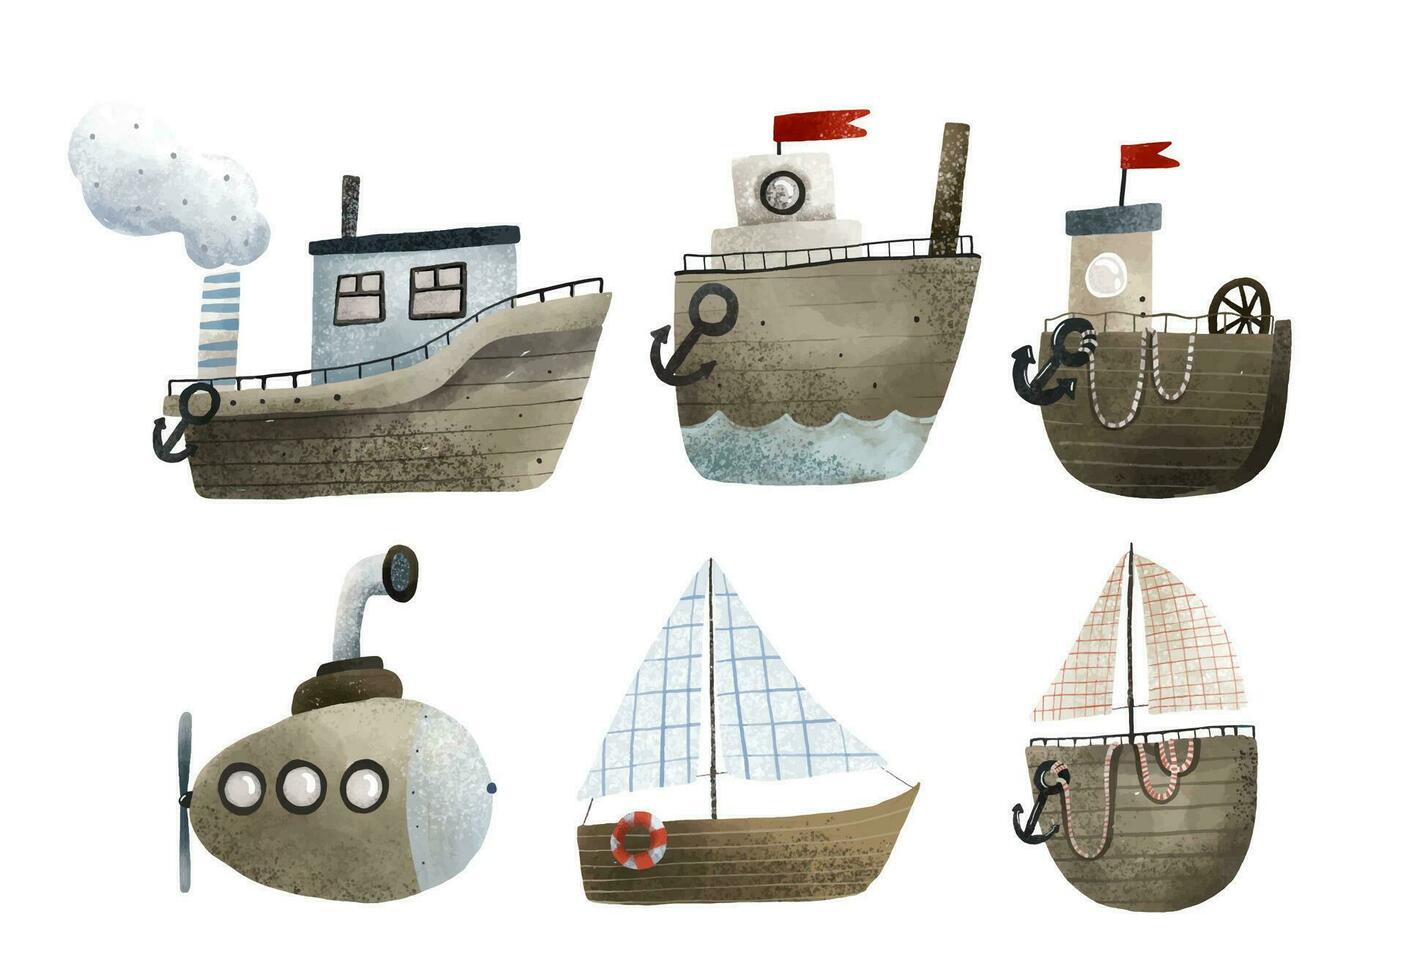 clip art with childish hand painted boats, ships, water transport. Cute illustration on white background, kids art. Ocean travelling vector